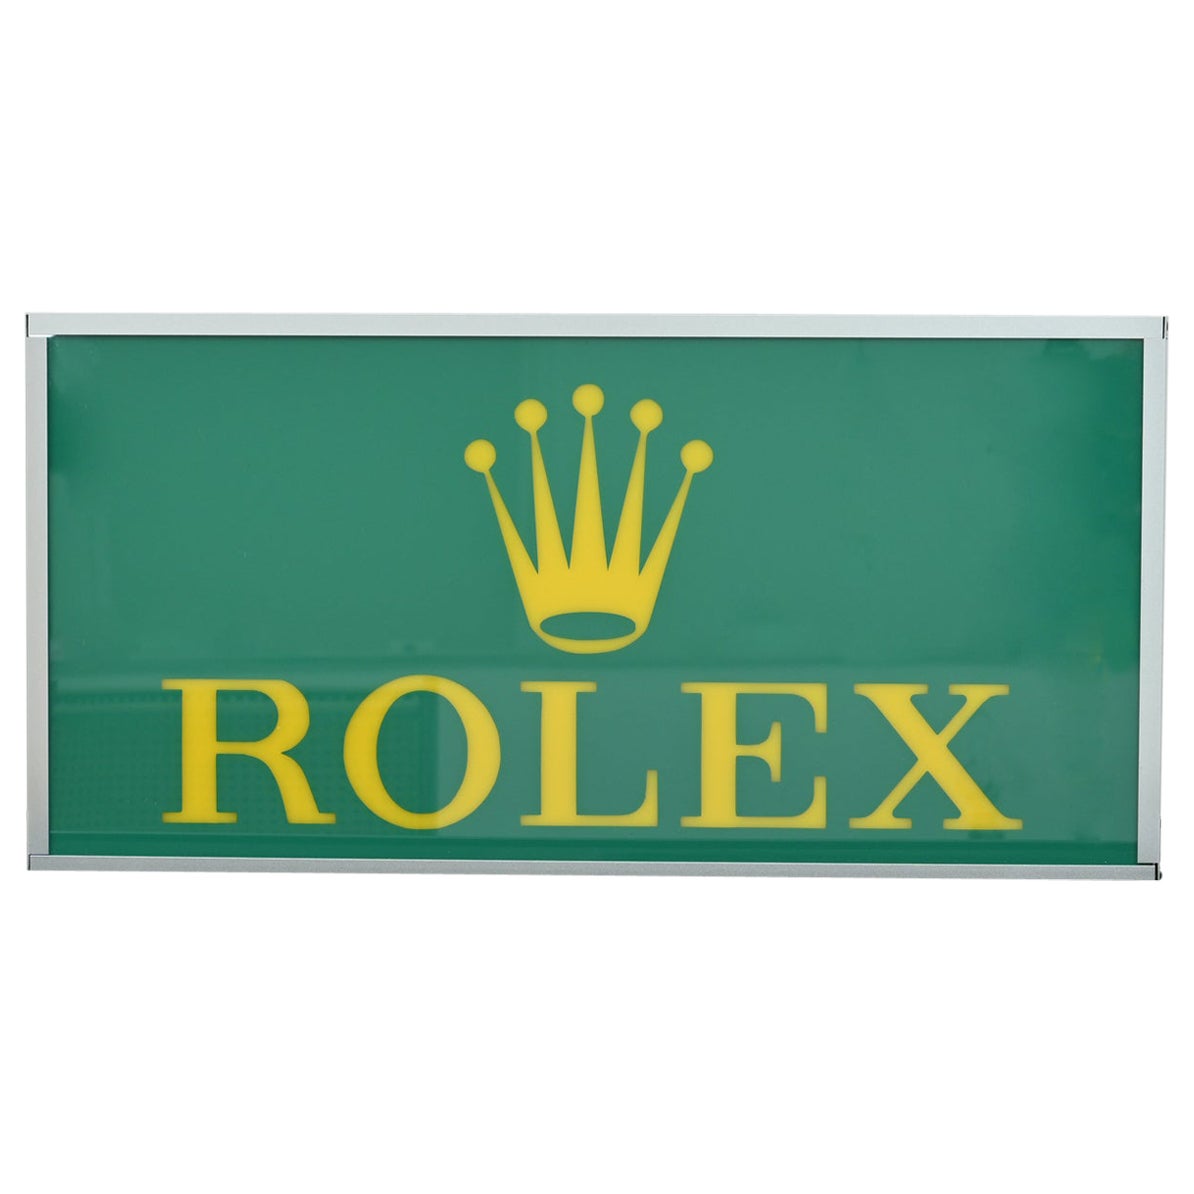 1990s ROLEX Advertising Signage with Yellow Lighting